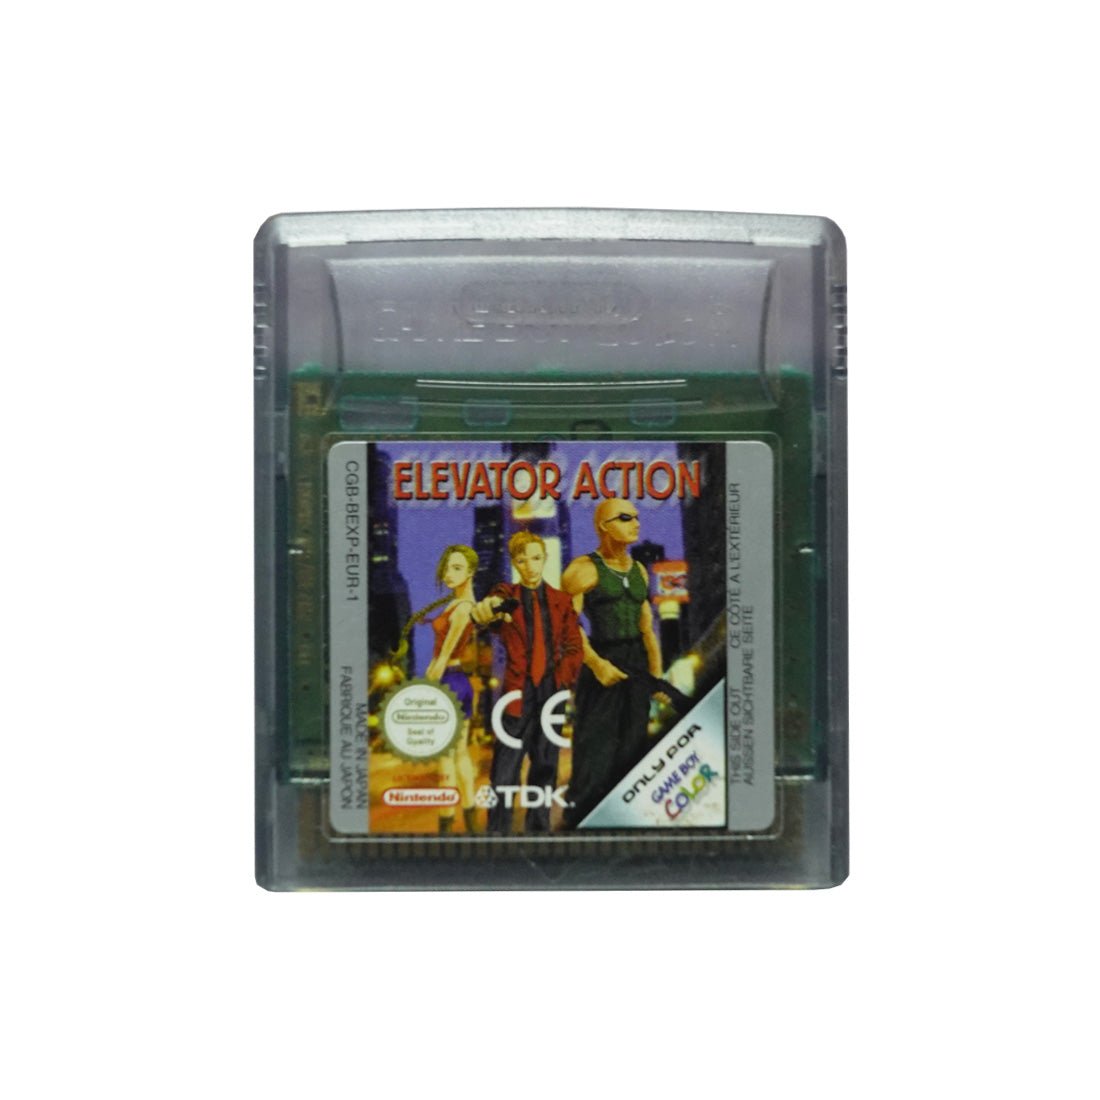 (Pre-Owned) Elevator Action - Gameboy Color - ريترو - Store 974 | ستور ٩٧٤